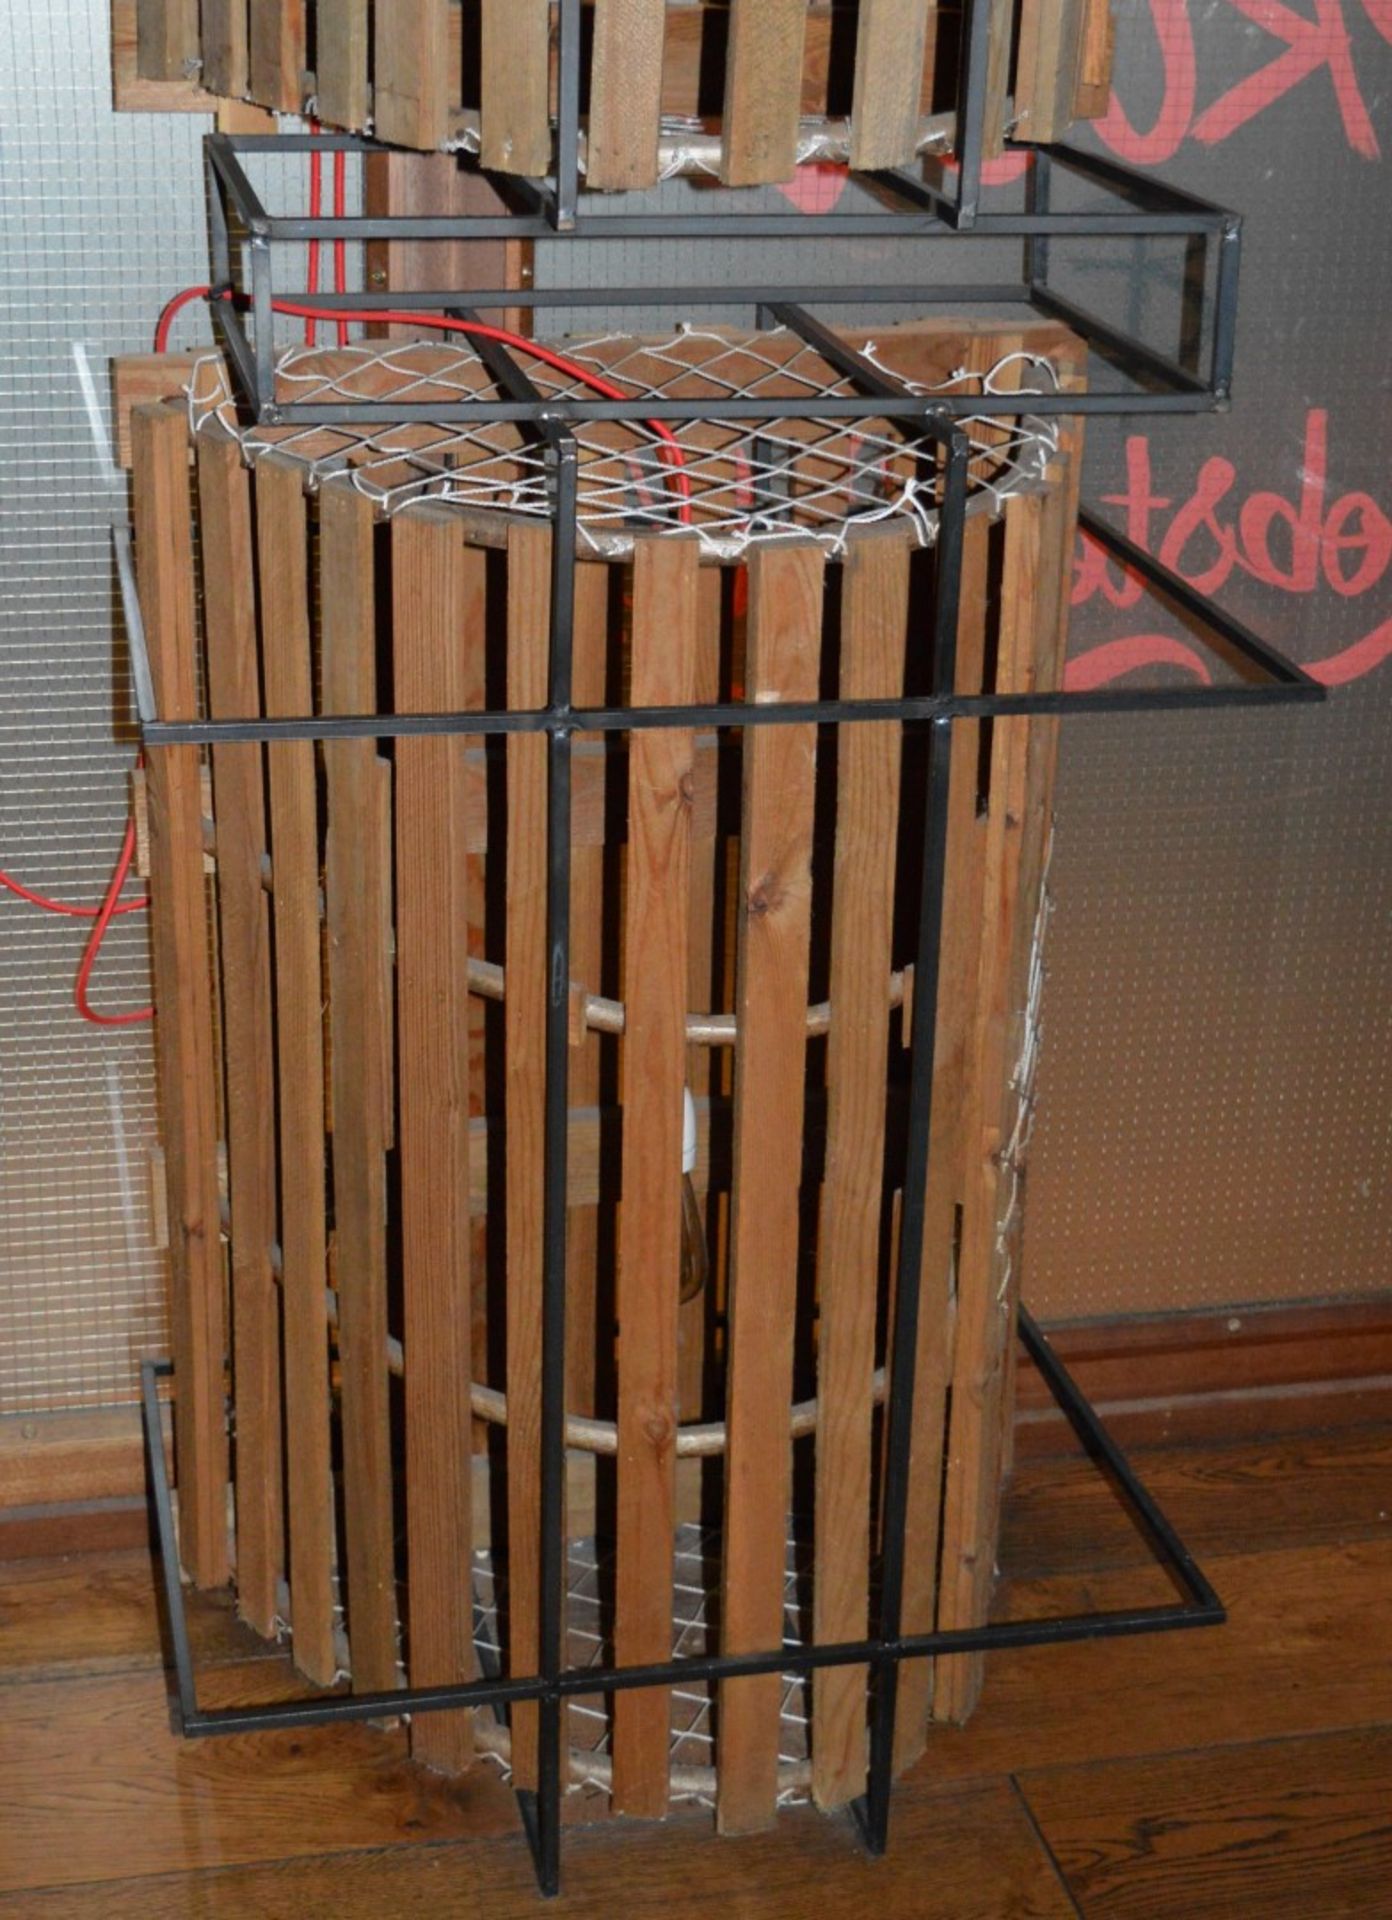 2 x Maritime Costal LOBSTER CAGES - Wooden Lobster Cages With Metal Cage protectors - Image 3 of 7